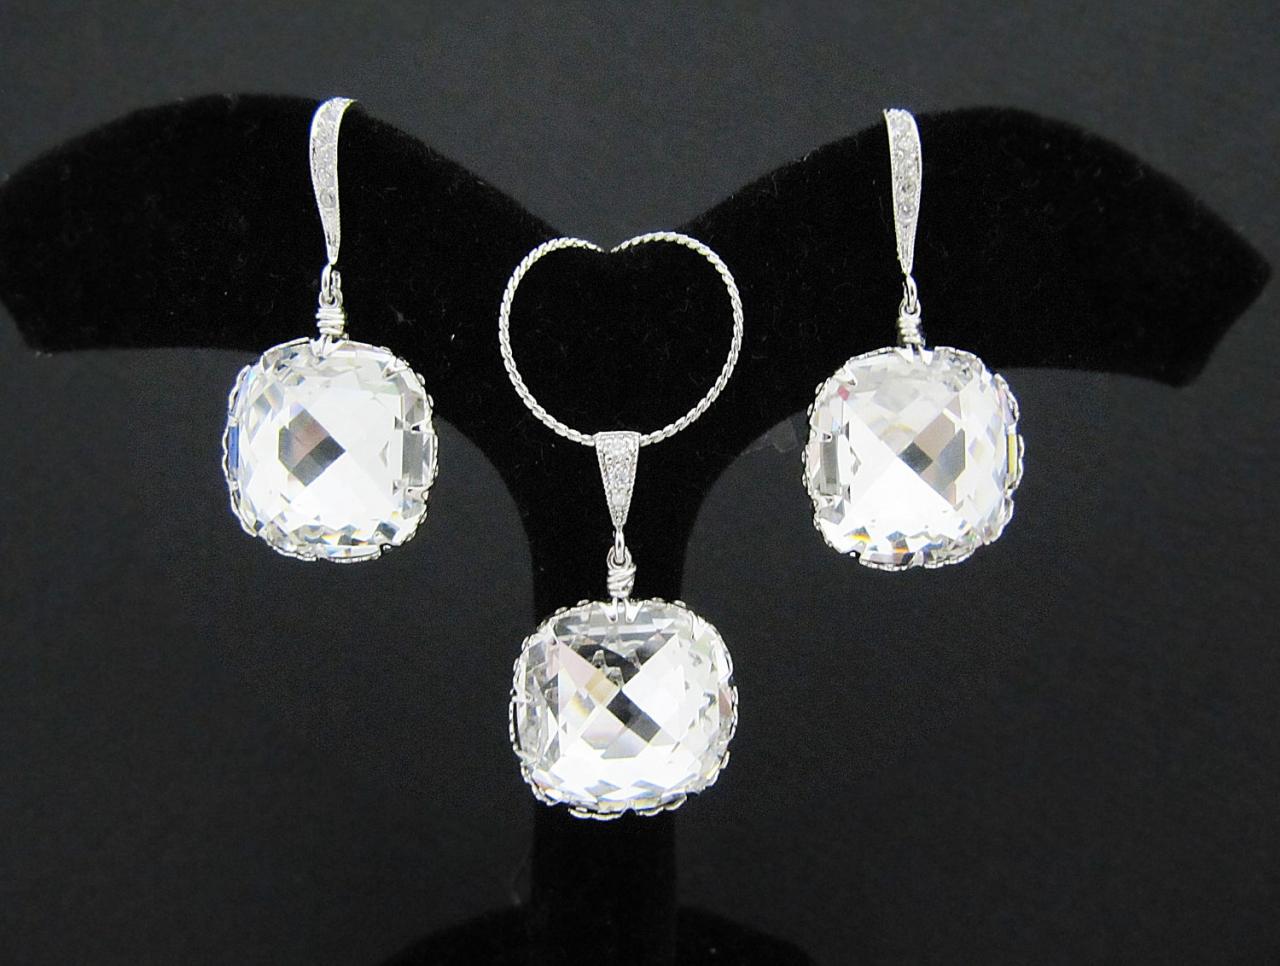 Bridal Necklace And Bridal Earrings Jewelry Set - Clear White Swarovski Crystal (large) Classical Square Drops